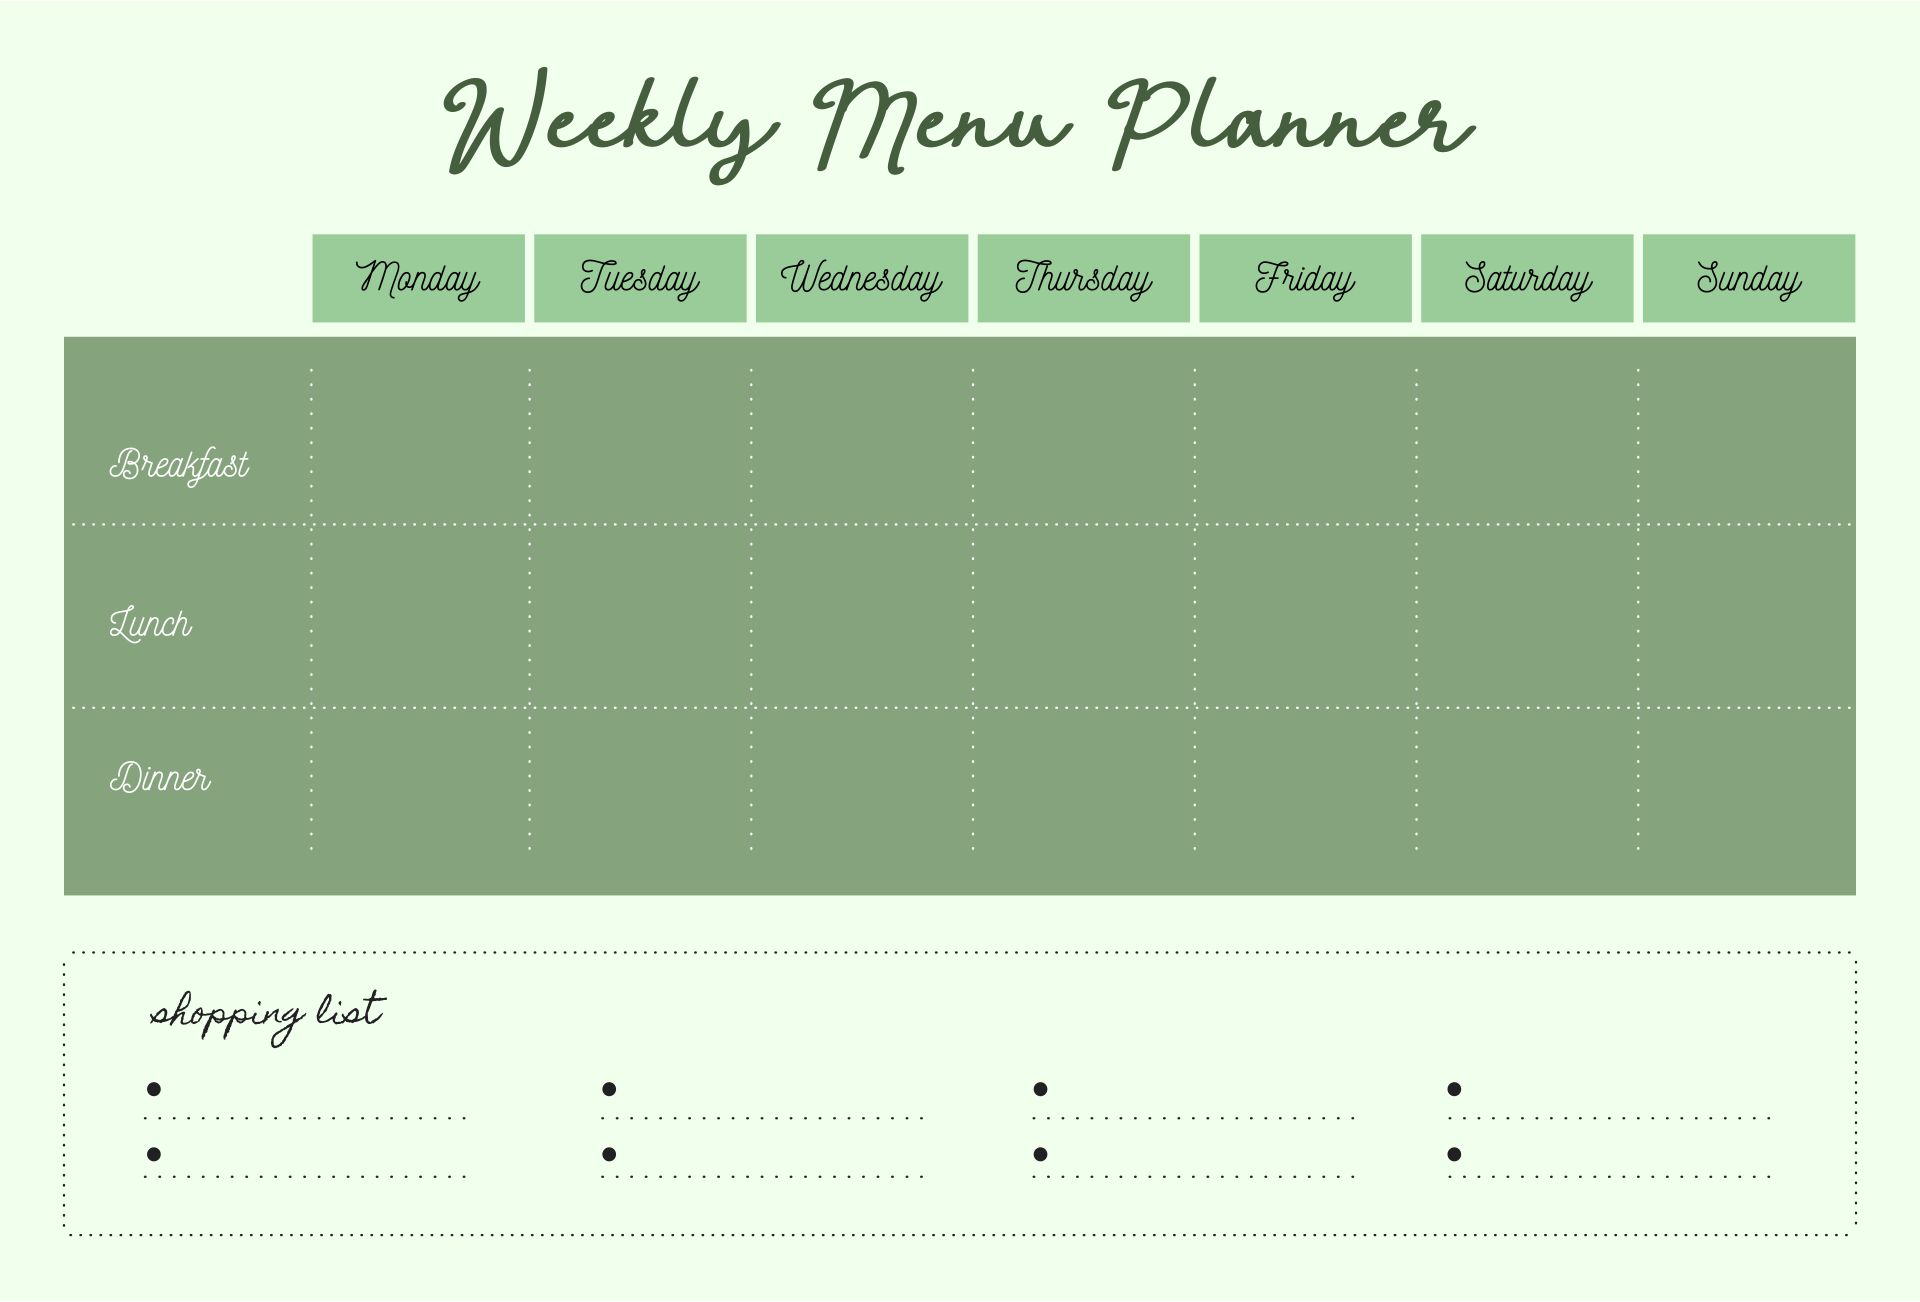 Daily Meal Planner Template from www.printablee.com